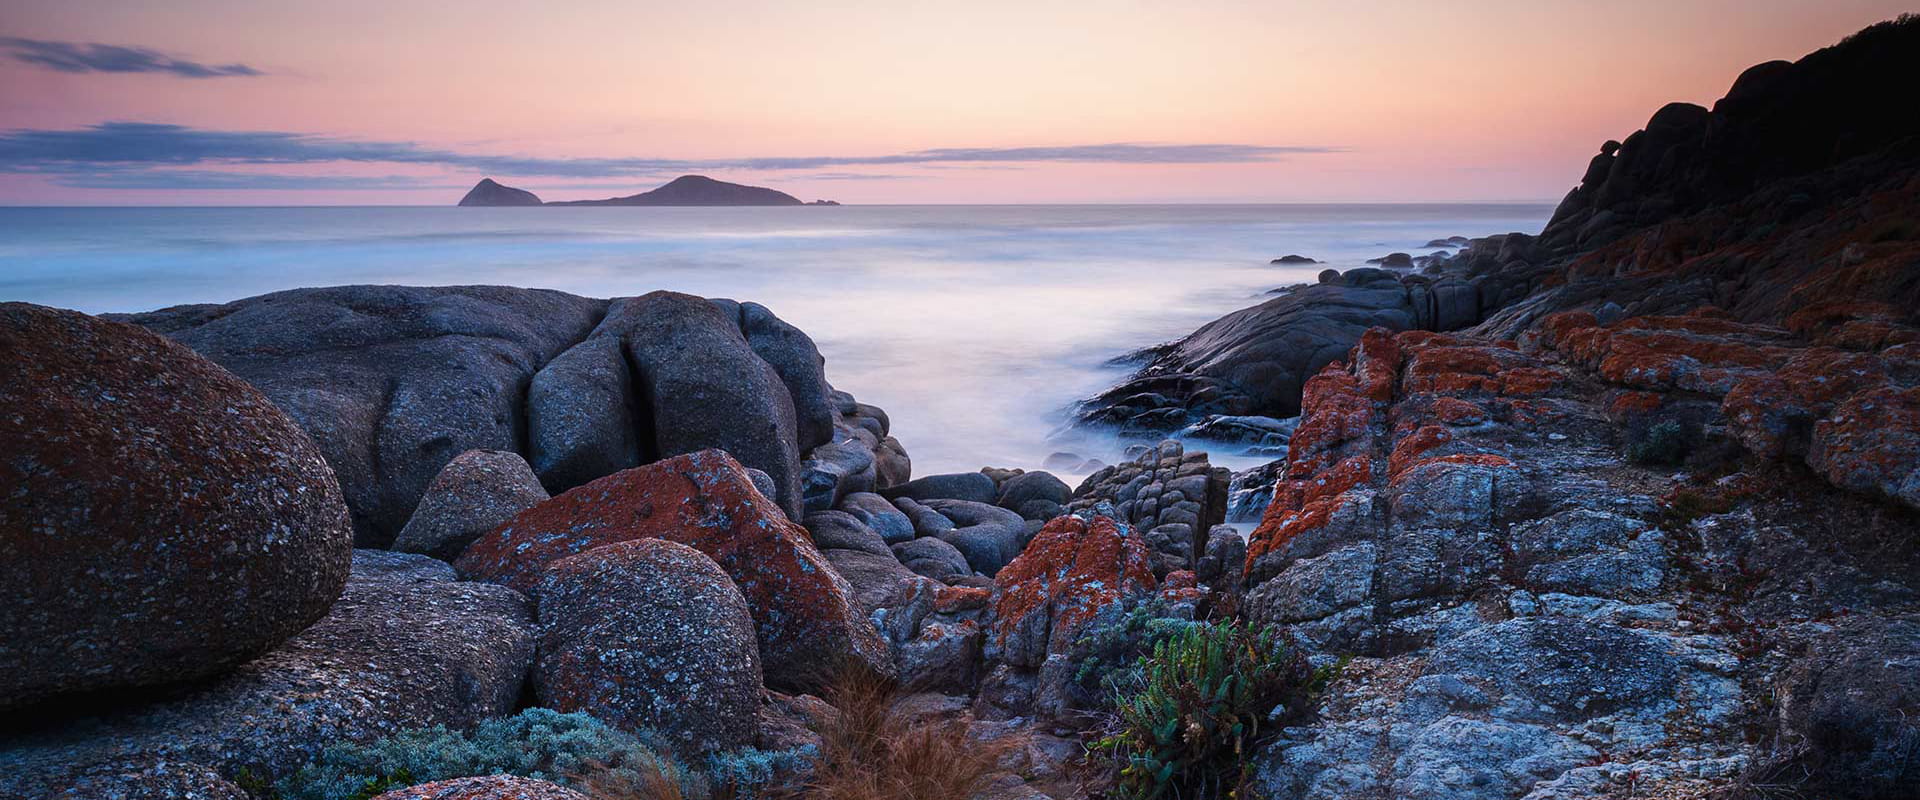 Sunset over water and rocks at Whisky Bay, Wilsons Promontory National Park